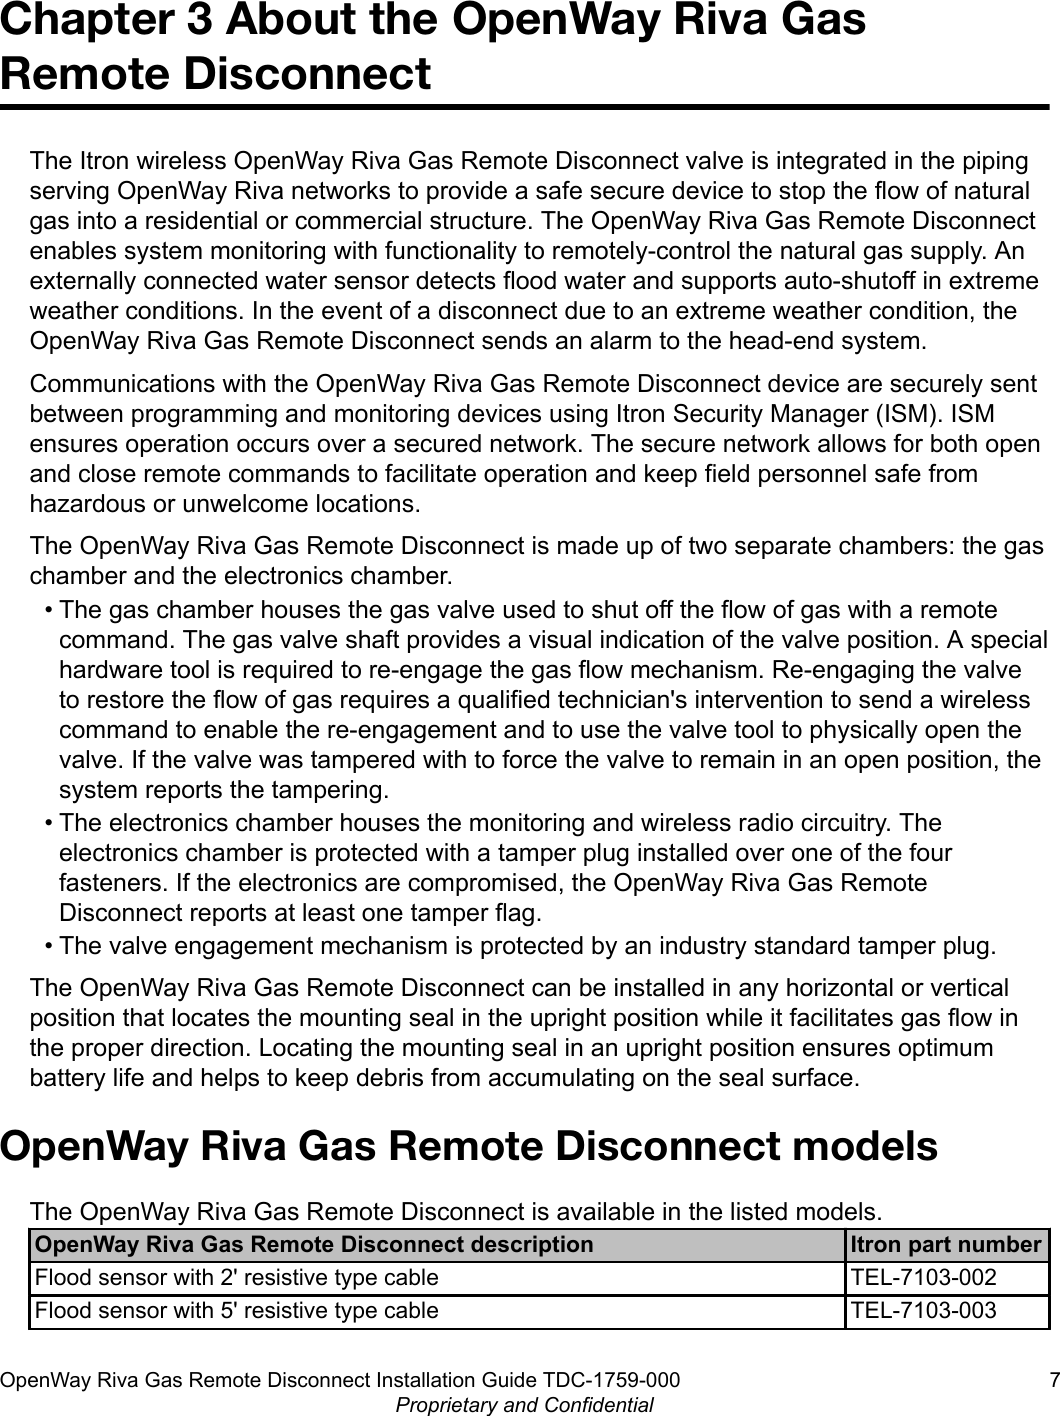 Chapter 3 About the OpenWay Riva GasRemote DisconnectThe Itron wireless OpenWay Riva Gas Remote Disconnect valve is integrated in the pipingserving OpenWay Riva networks to provide a safe secure device to stop the flow of naturalgas into a residential or commercial structure. The OpenWay Riva Gas Remote Disconnectenables system monitoring with functionality to remotely-control the natural gas supply. Anexternally connected water sensor detects flood water and supports auto-shutoff in extremeweather conditions. In the event of a disconnect due to an extreme weather condition, theOpenWay Riva Gas Remote Disconnect sends an alarm to the head-end system.Communications with the OpenWay Riva Gas Remote Disconnect device are securely sentbetween programming and monitoring devices using Itron Security Manager (ISM). ISMensures operation occurs over a secured network. The secure network allows for both openand close remote commands to facilitate operation and keep field personnel safe fromhazardous or unwelcome locations.The OpenWay Riva Gas Remote Disconnect is made up of two separate chambers: the gaschamber and the electronics chamber.• The gas chamber houses the gas valve used to shut off the flow of gas with a remotecommand. The gas valve shaft provides a visual indication of the valve position. A specialhardware tool is required to re-engage the gas flow mechanism. Re-engaging the valveto restore the flow of gas requires a qualified technician&apos;s intervention to send a wirelesscommand to enable the re-engagement and to use the valve tool to physically open thevalve. If the valve was tampered with to force the valve to remain in an open position, thesystem reports the tampering.• The electronics chamber houses the monitoring and wireless radio circuitry. Theelectronics chamber is protected with a tamper plug installed over one of the fourfasteners. If the electronics are compromised, the OpenWay Riva Gas RemoteDisconnect reports at least one tamper flag.• The valve engagement mechanism is protected by an industry standard tamper plug.The OpenWay Riva Gas Remote Disconnect can be installed in any horizontal or verticalposition that locates the mounting seal in the upright position while it facilitates gas flow inthe proper direction. Locating the mounting seal in an upright position ensures optimumbattery life and helps to keep debris from accumulating on the seal surface.OpenWay Riva Gas Remote Disconnect modelsThe OpenWay Riva Gas Remote Disconnect is available in the listed models.OpenWay Riva Gas Remote Disconnect description Itron part numberFlood sensor with 2&apos; resistive type cable TEL-7103-002Flood sensor with 5&apos; resistive type cable TEL-7103-003OpenWay Riva Gas Remote Disconnect Installation Guide TDC-1759-000 7Proprietary and Confidential